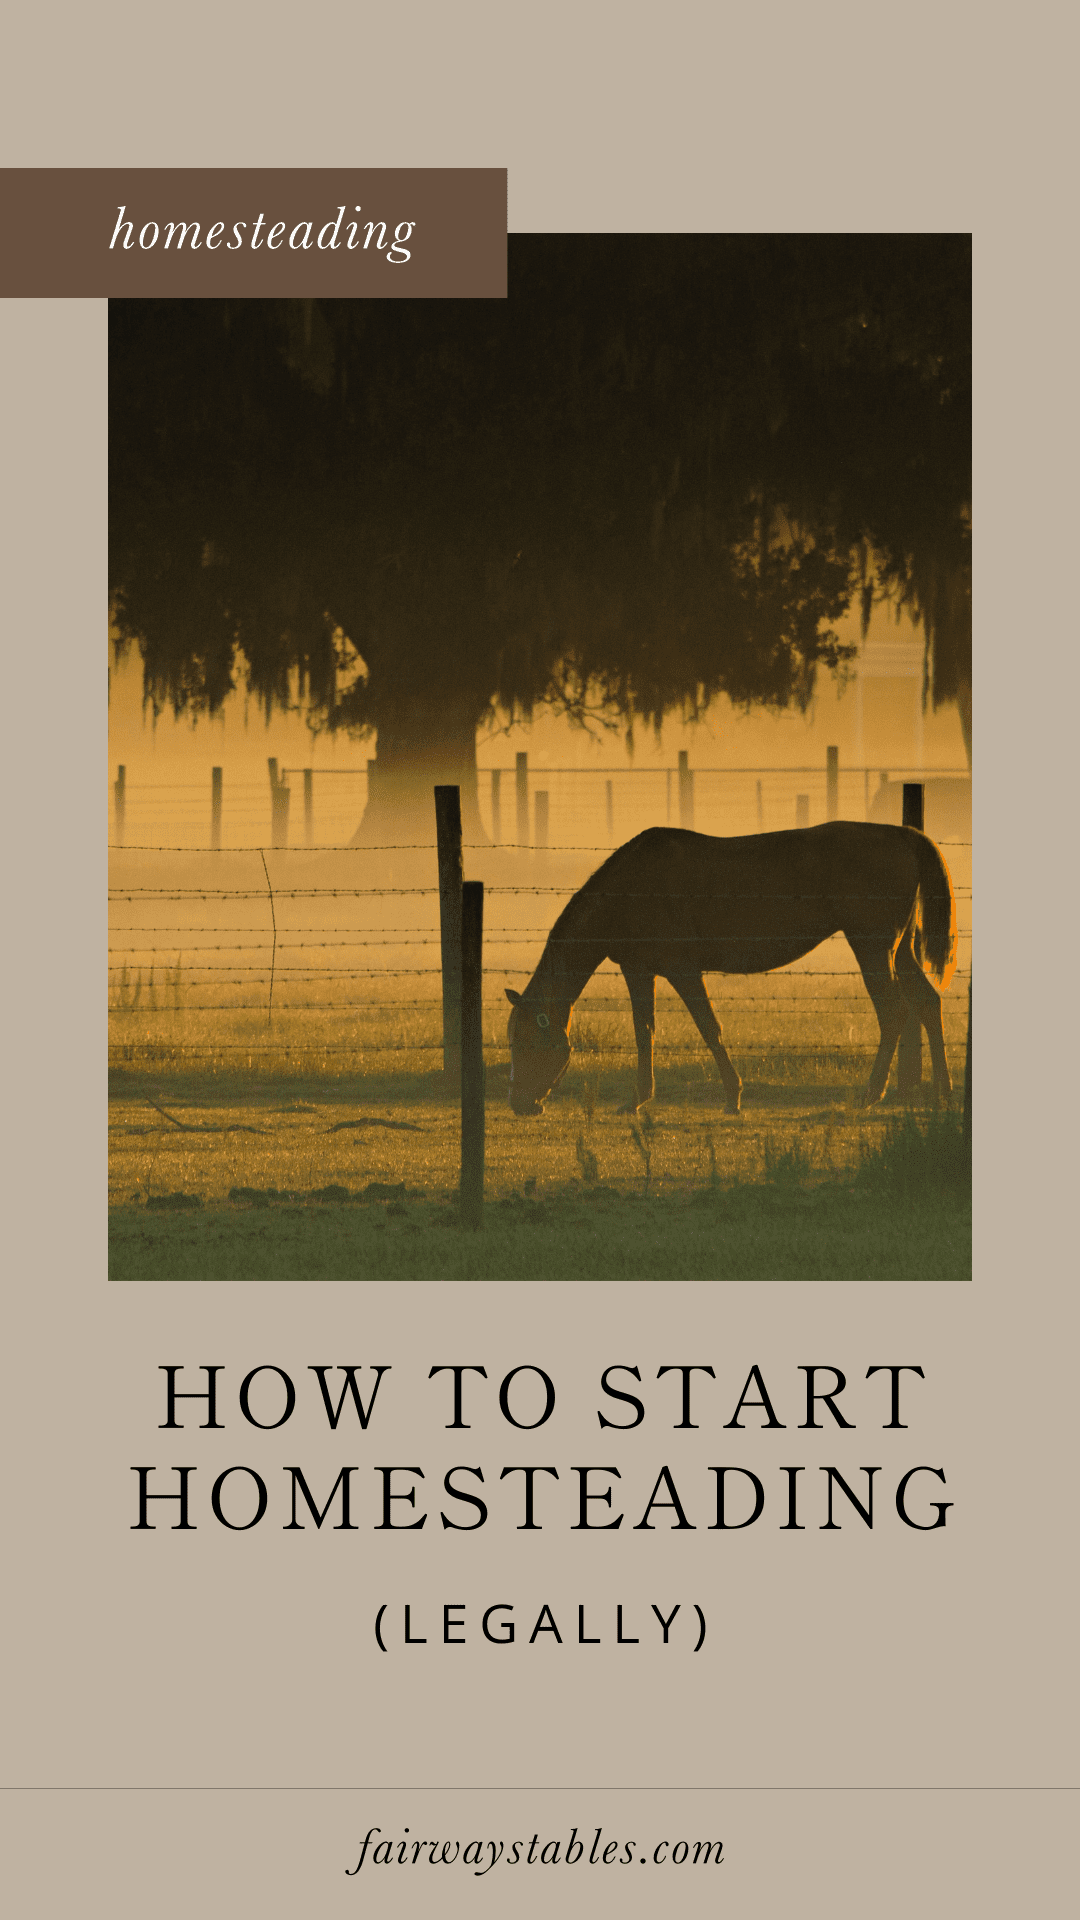 How To Start Homesteading Legally